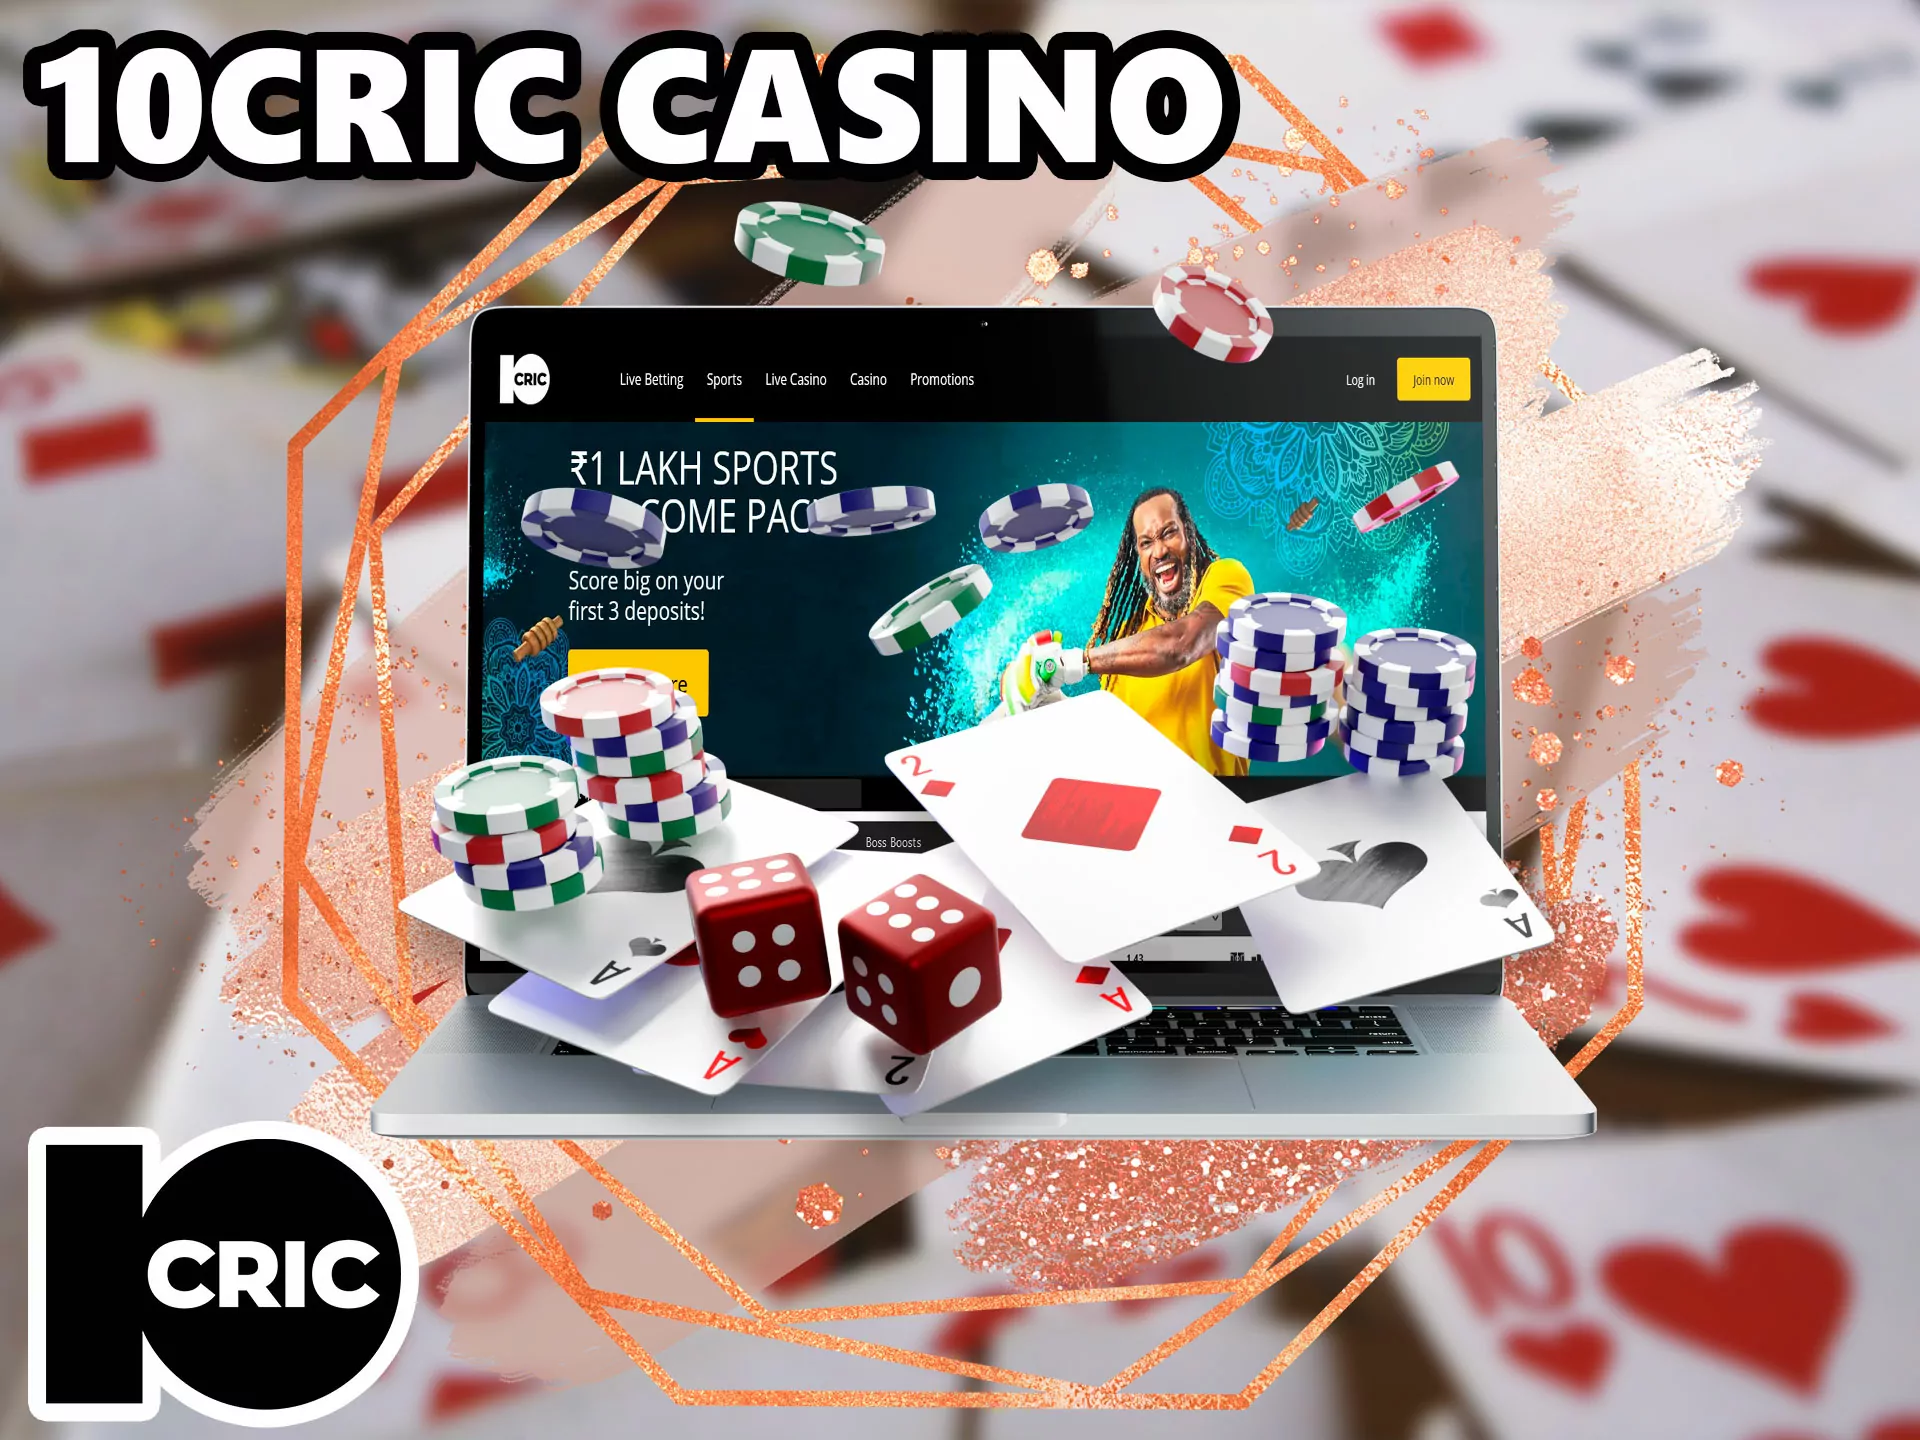 The platform is focused on gambling, you will find a lot of interesting things for yourself.